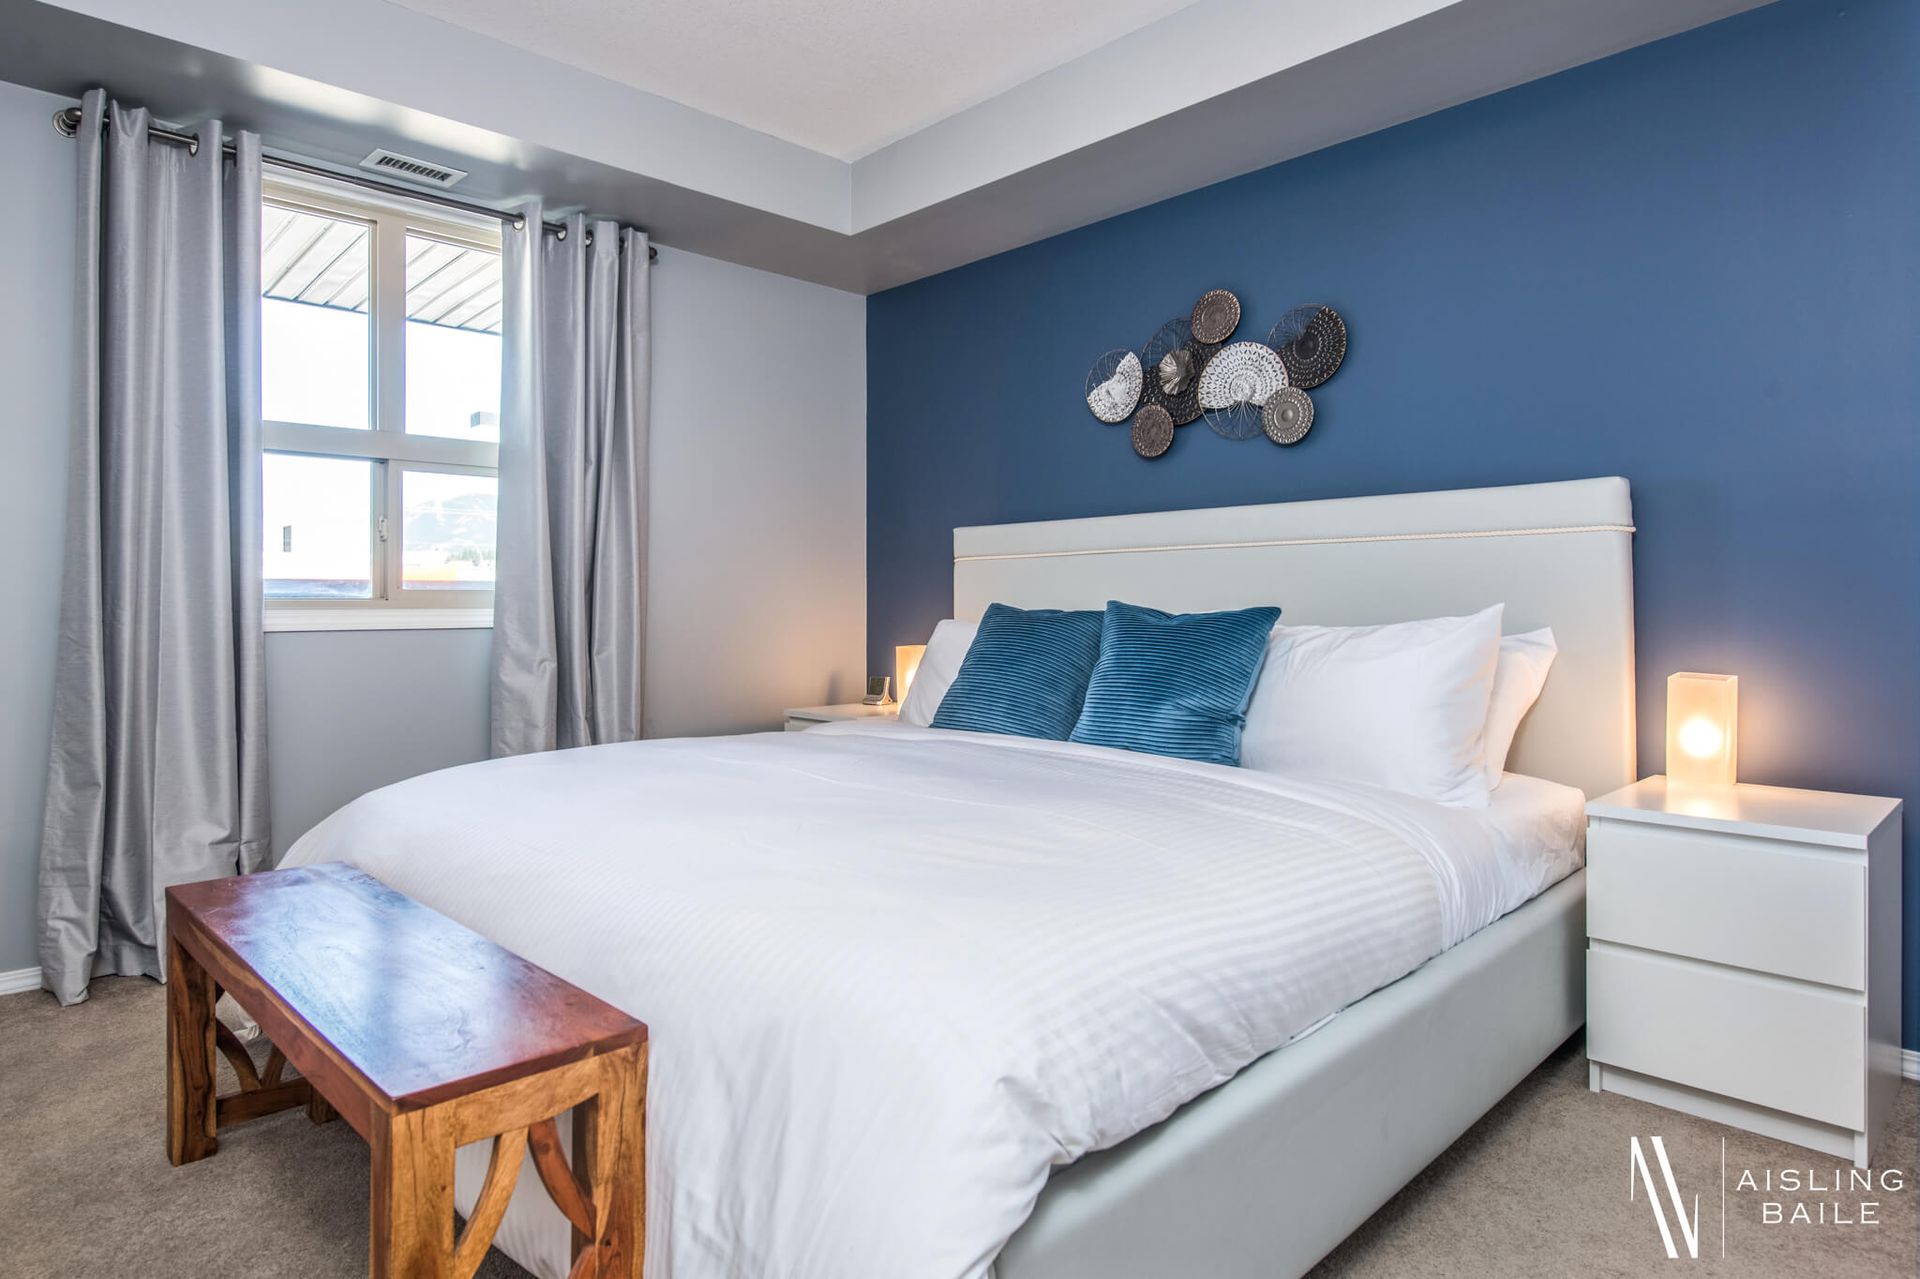 Primary bedroom at the Trendy condo at Lake Windermere Pointe in Invermere, a BC Vacation Rental hosted by Aisling Baile Property Management.